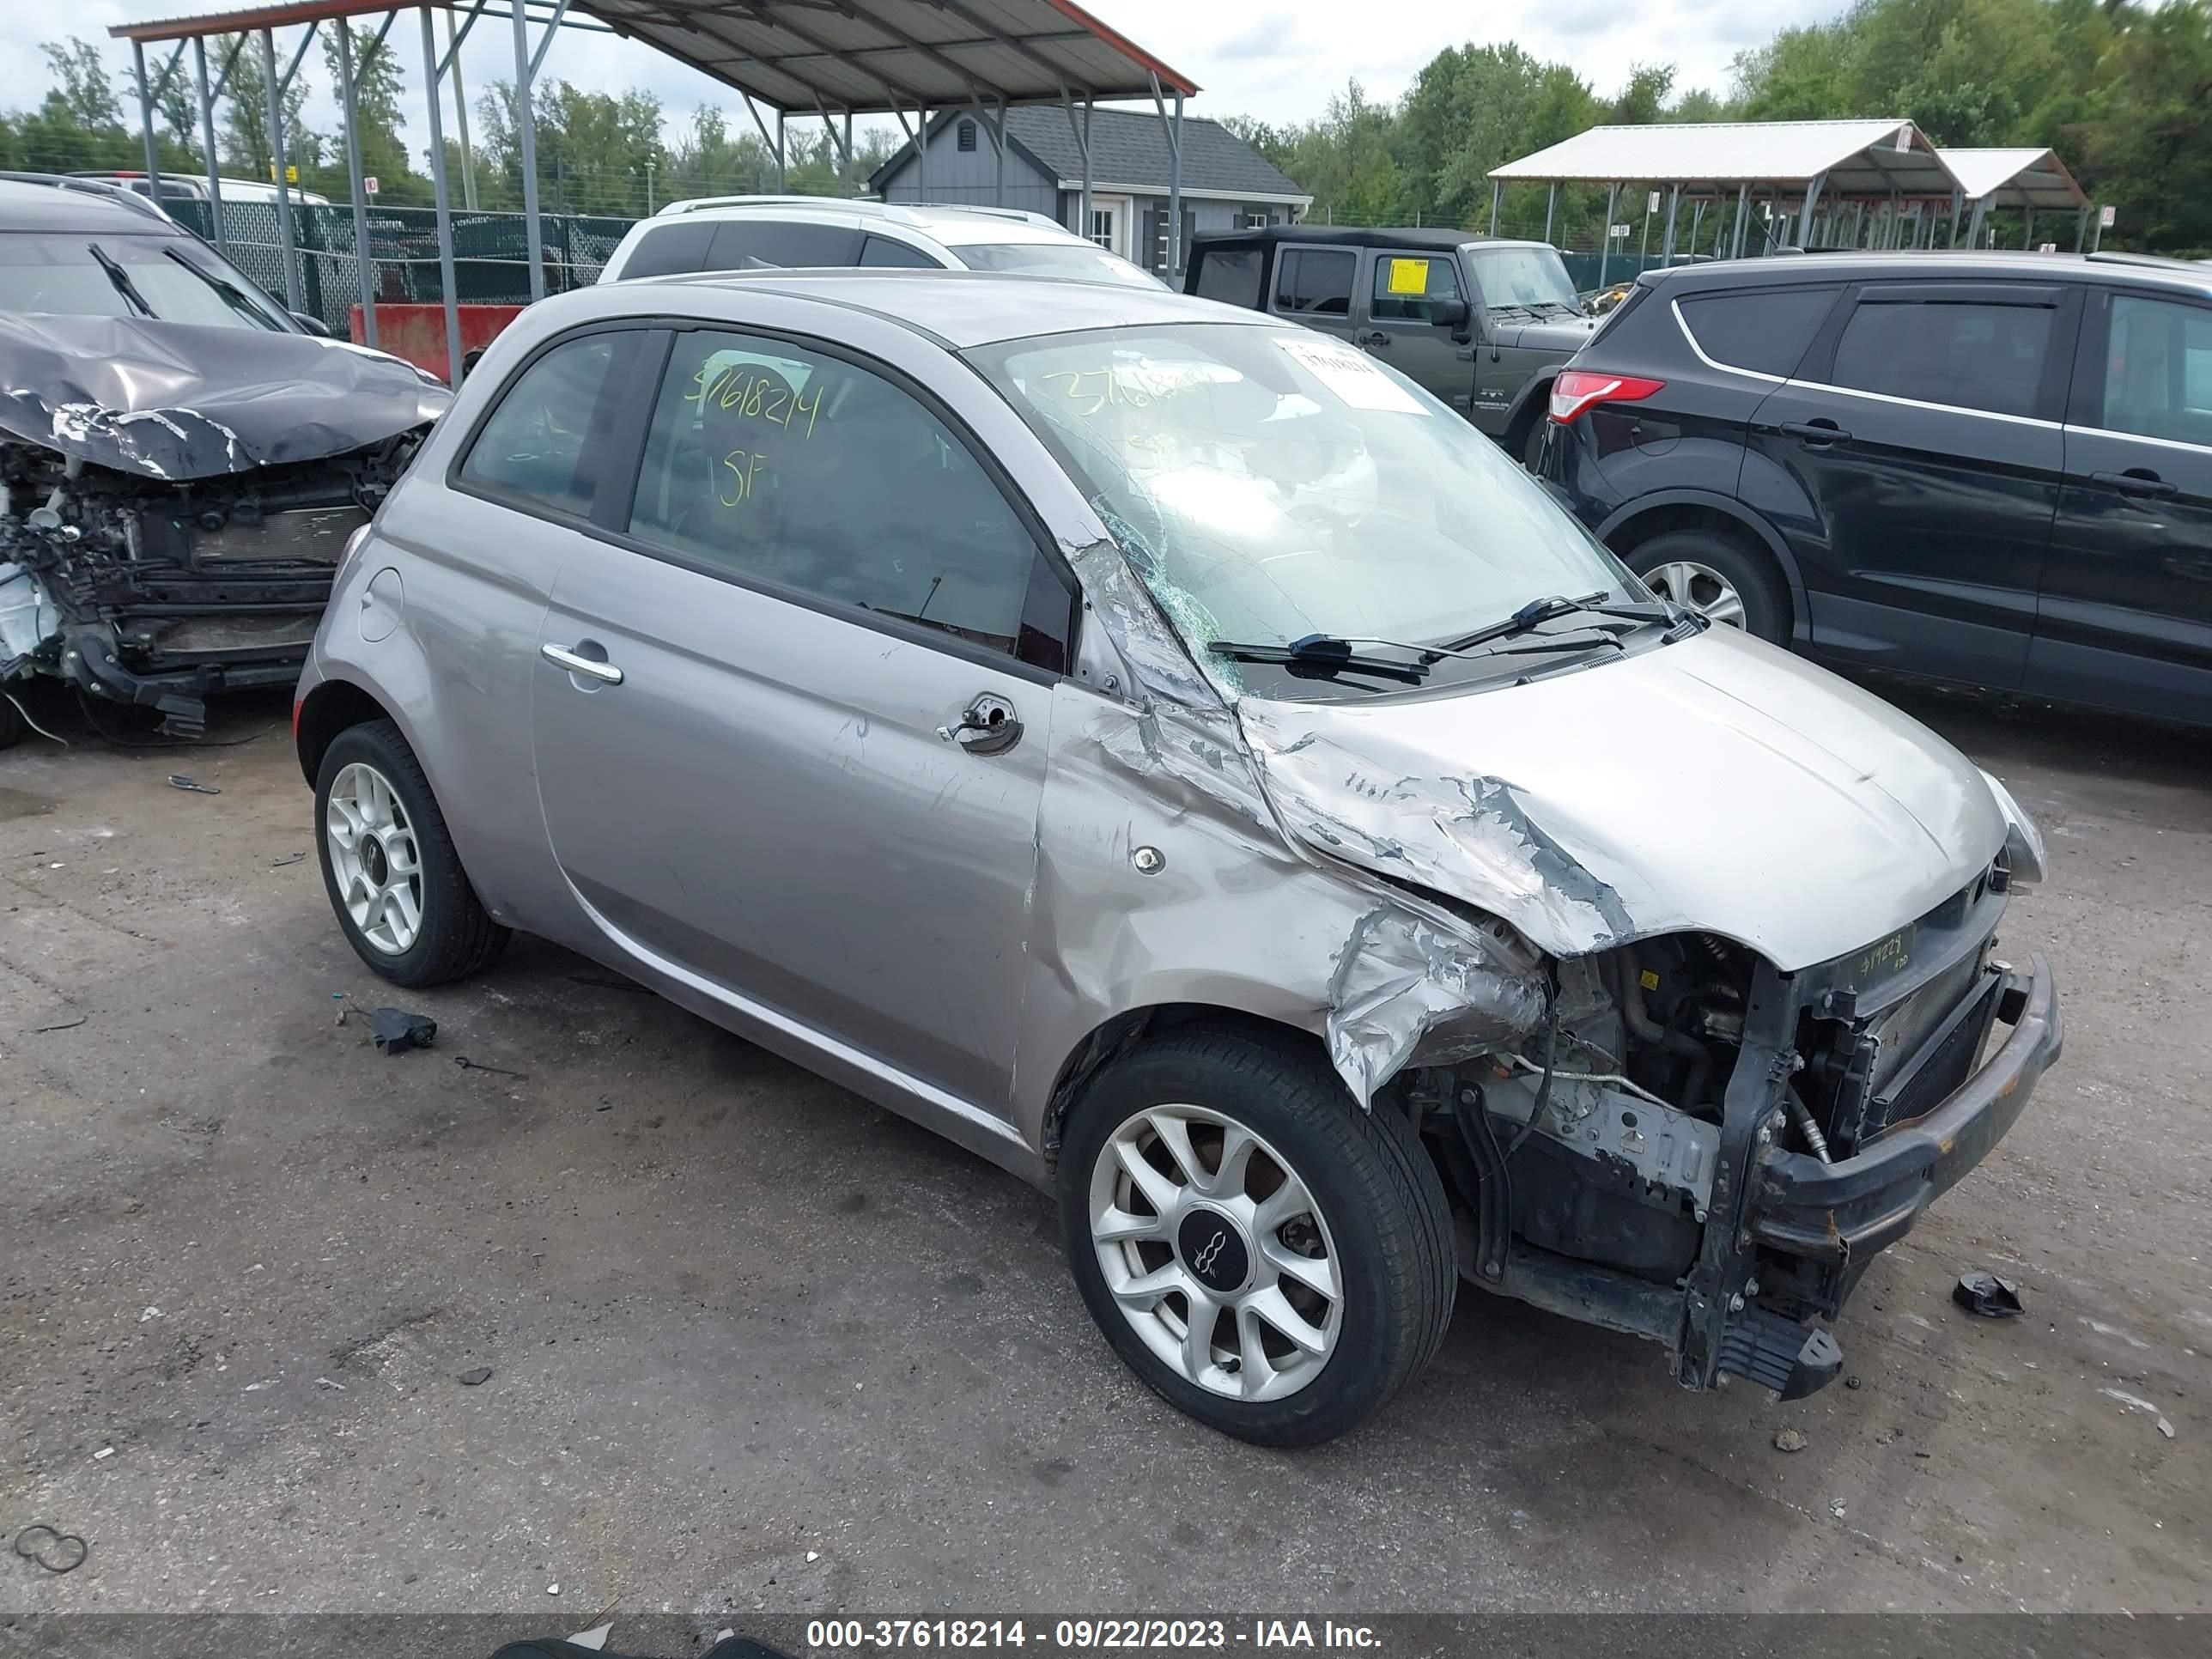 vin: 3C3CFFKR4HT586392 3C3CFFKR4HT586392 2017 fiat 500 1400 for Sale in 21226, 3131 Hawkins Point Road, Baltimore, Maryland, USA